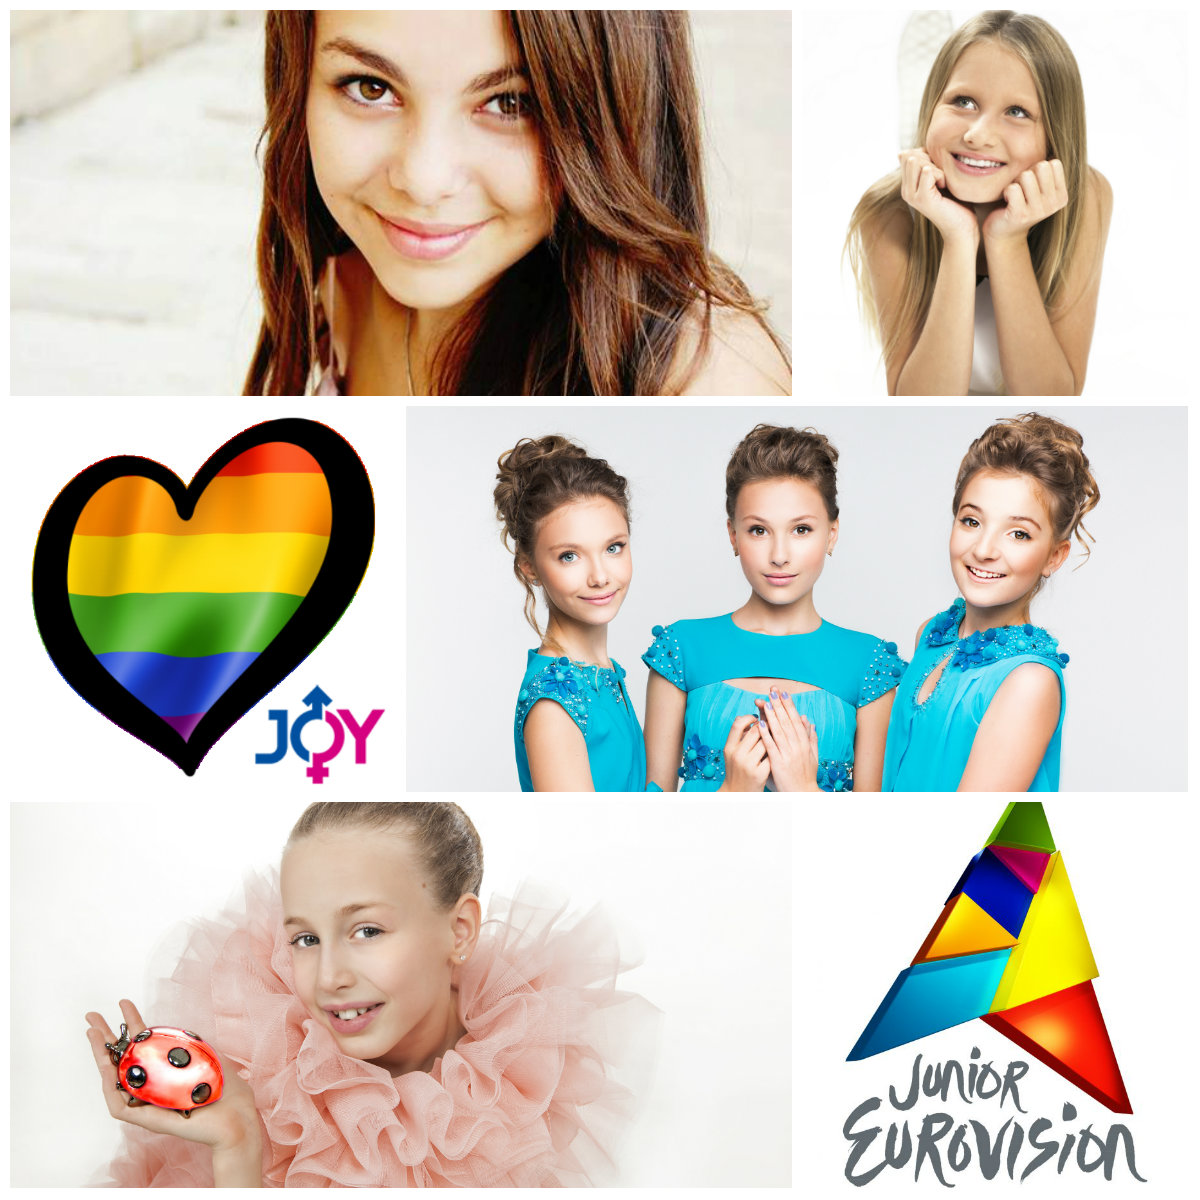 Junior Eurovision 2014 Preview #2 – Something Different